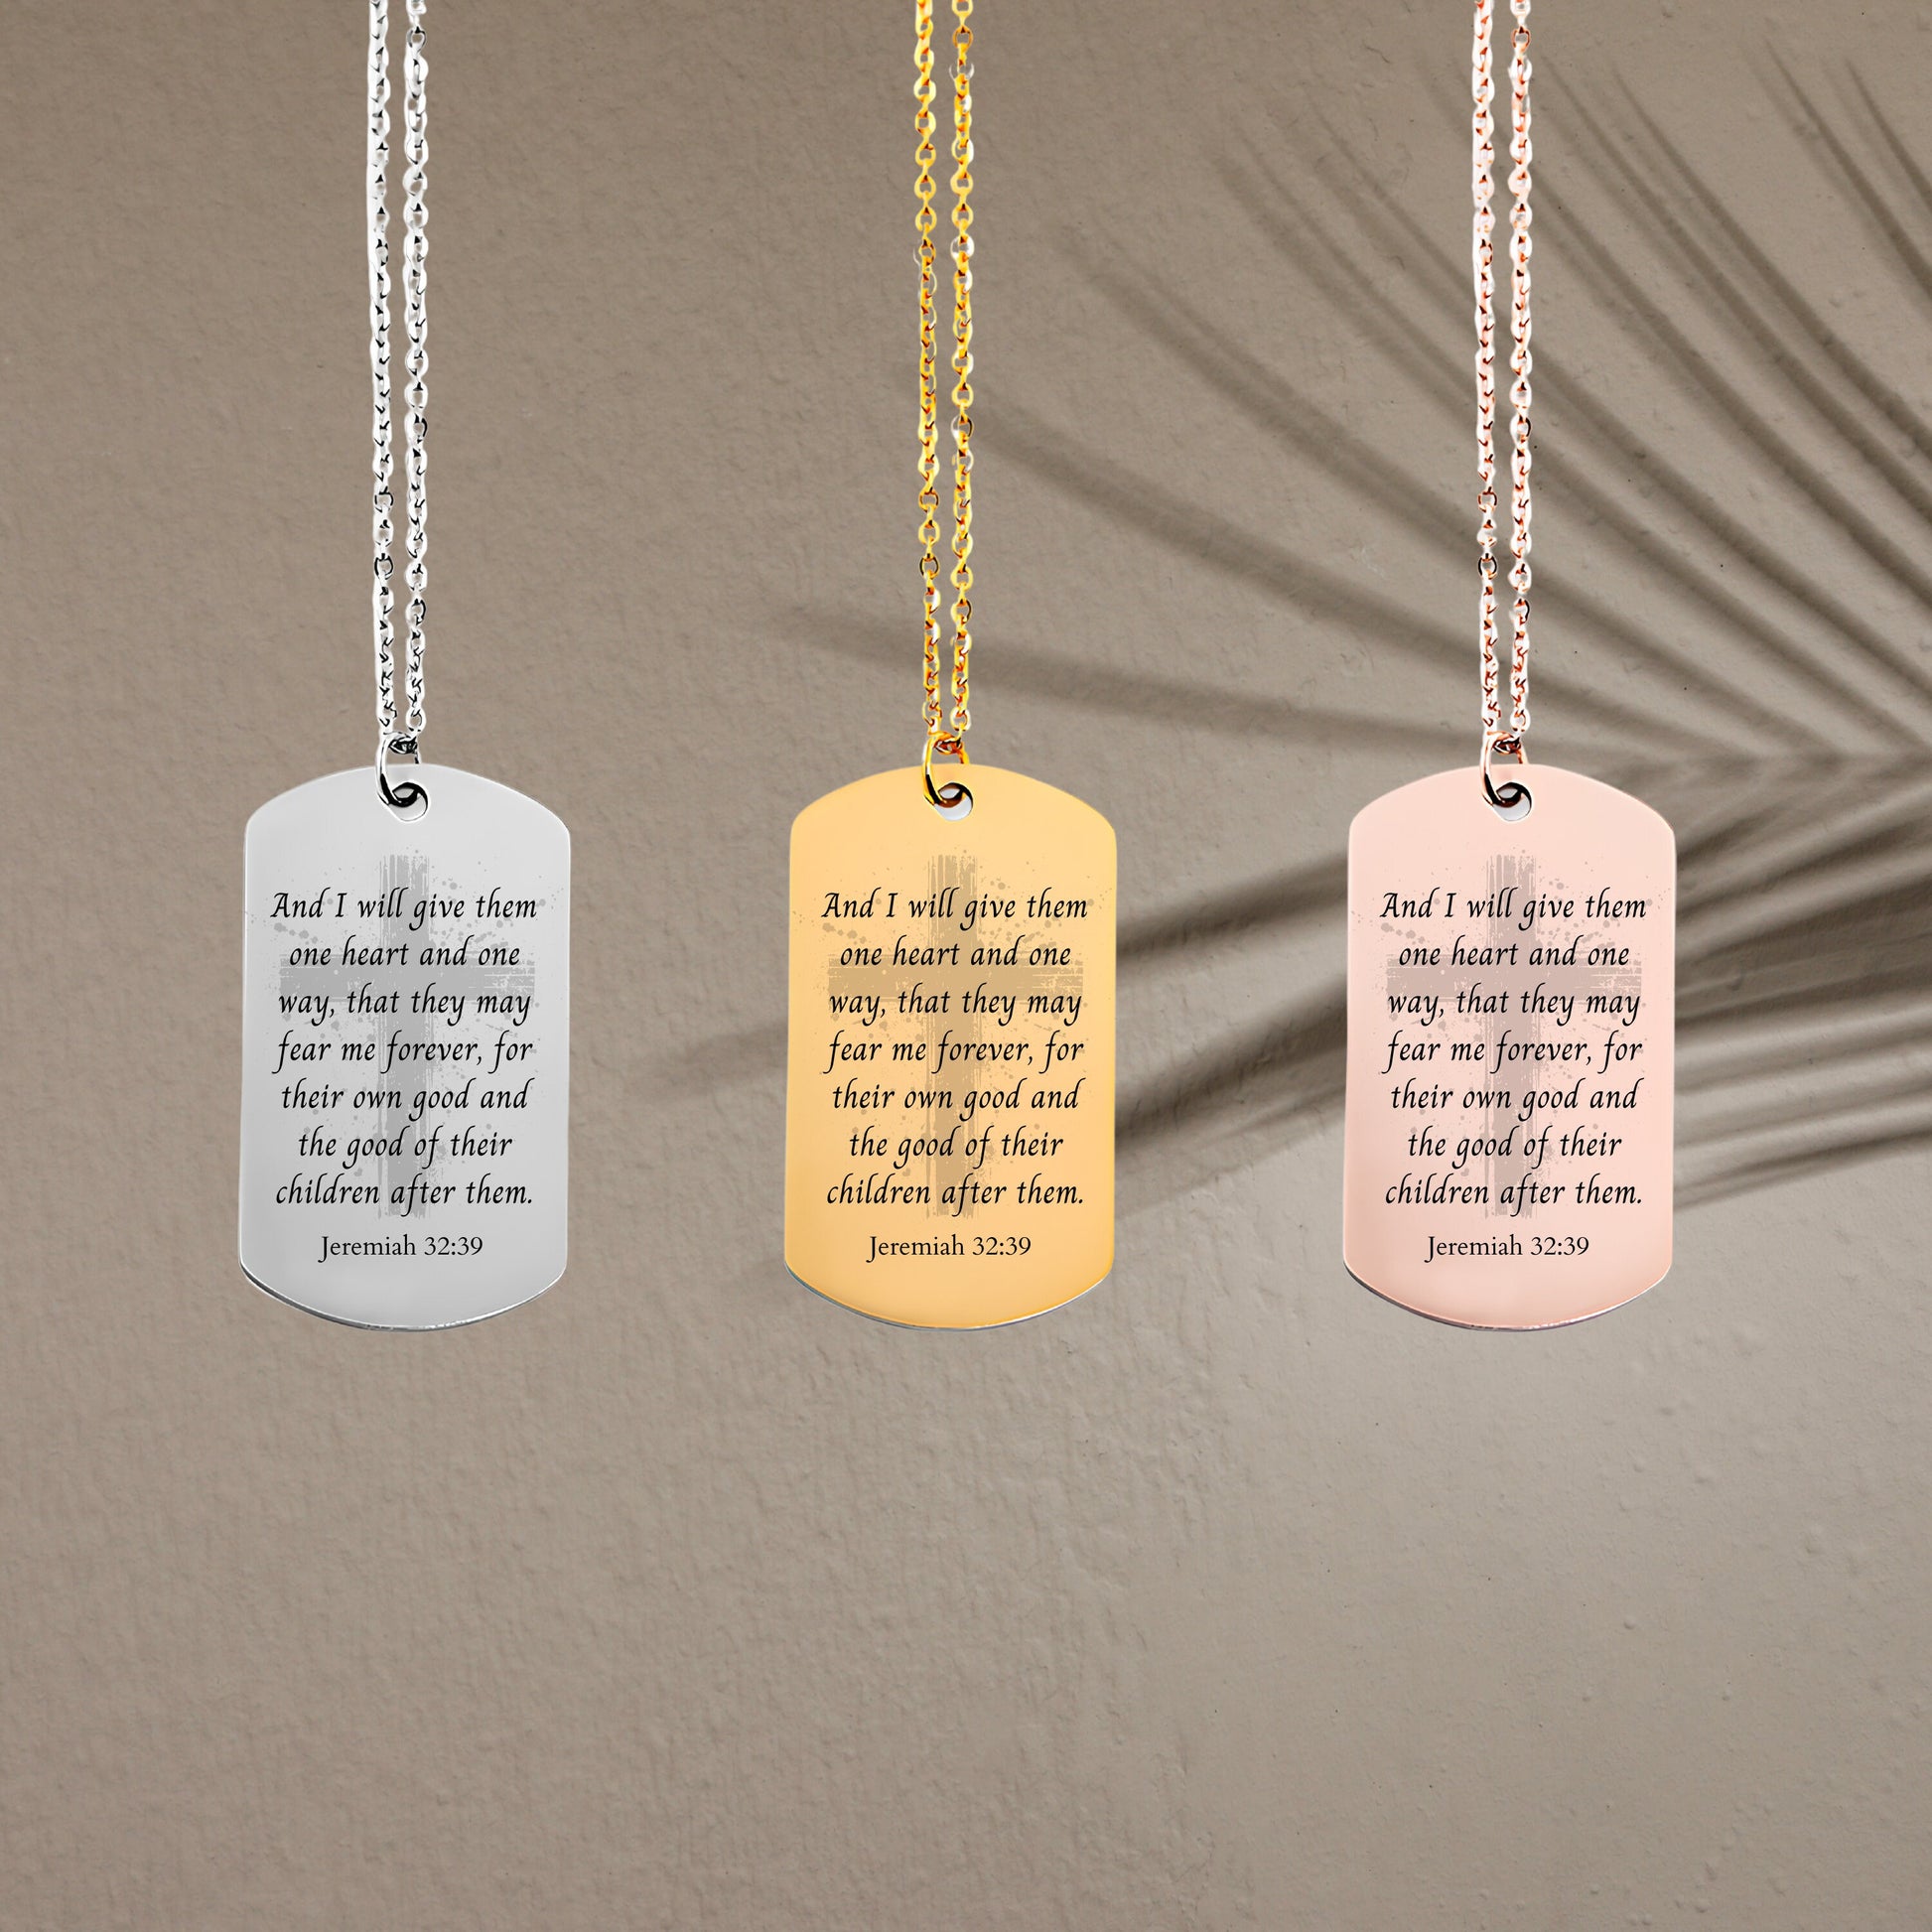 Jeremiah 32 39 quote necklace, gold bible verse, 14k gold cross charm necklace, confirmation gift, gold bar tag necklace,religious scripture